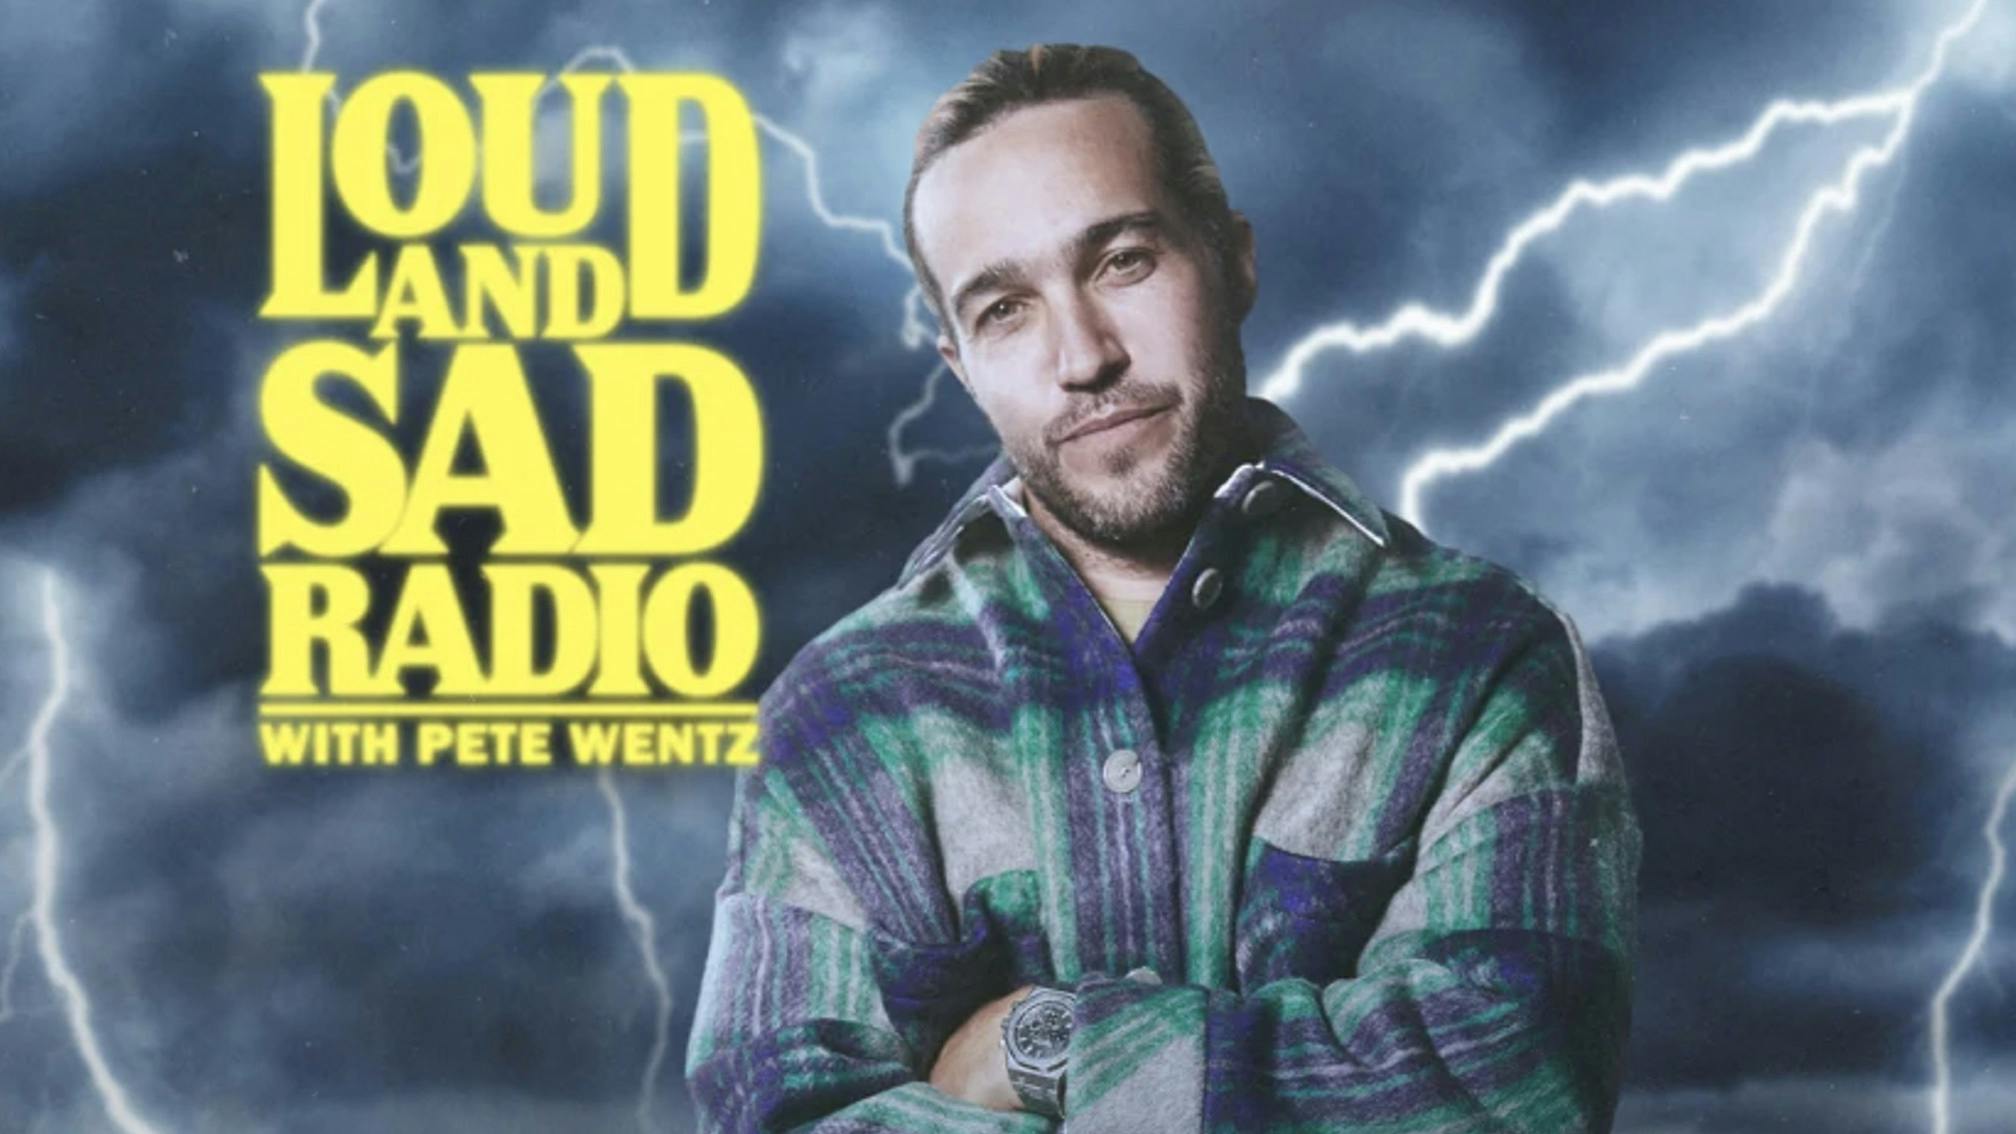 Fall Out Boy's Pete Wentz debuts new Apple radio show, Loud And Sad